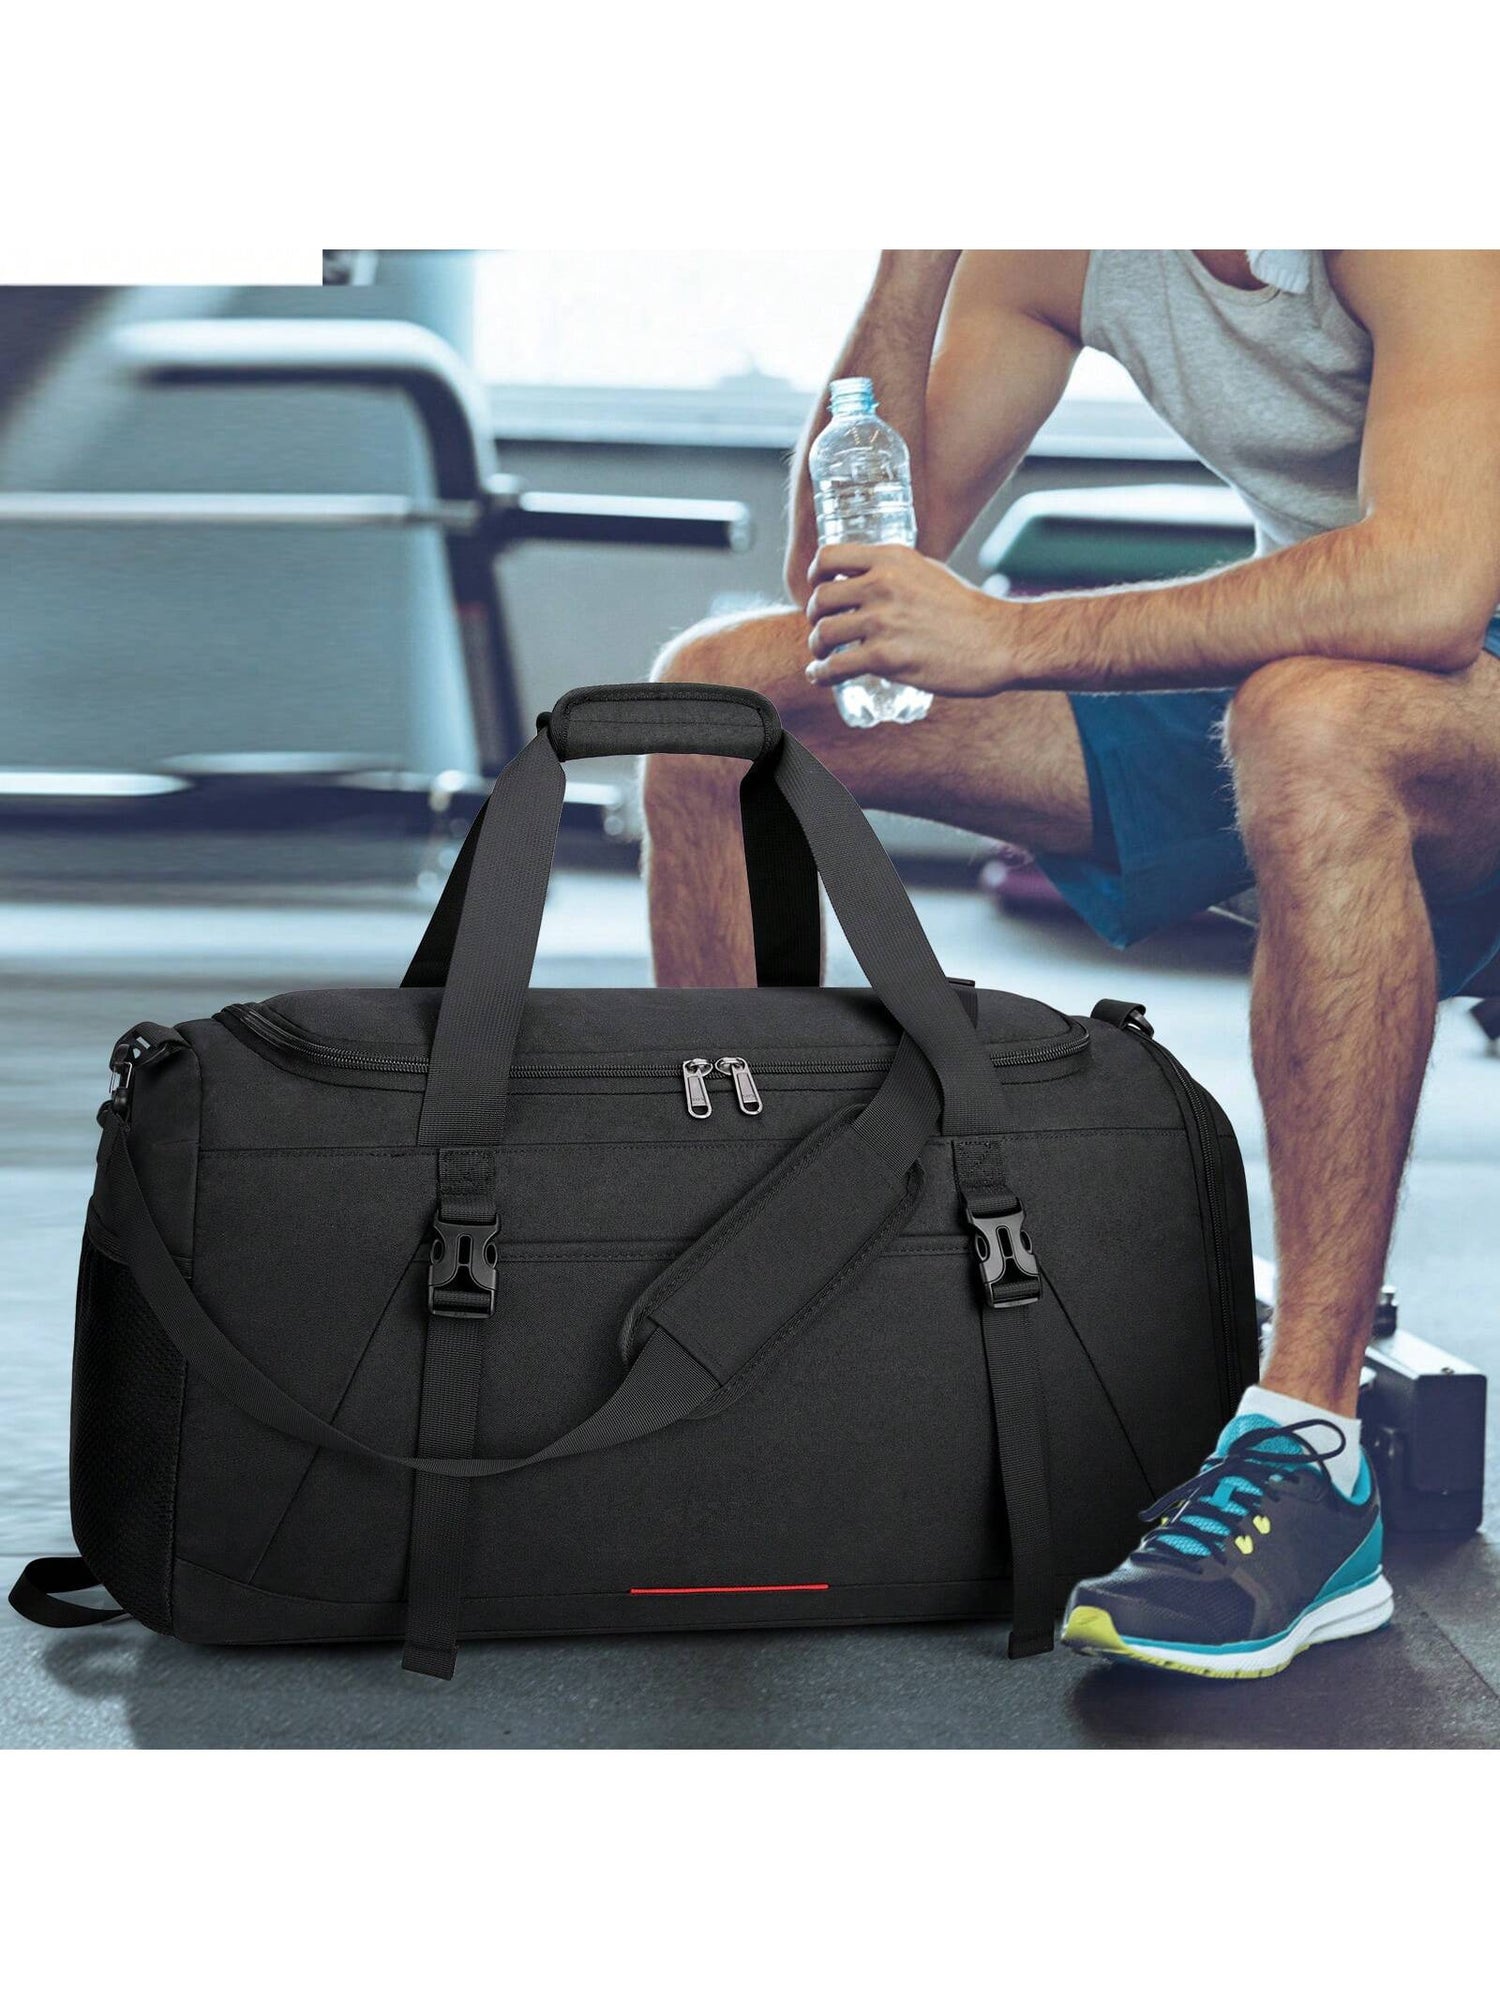 Gym Bag for Men Women 40L Water Resistant Sports Bag Gym Duffle Bag with Wet Pocket Large Travel Duffel Bag Weekender Overnight Bag with Shoe Compartment